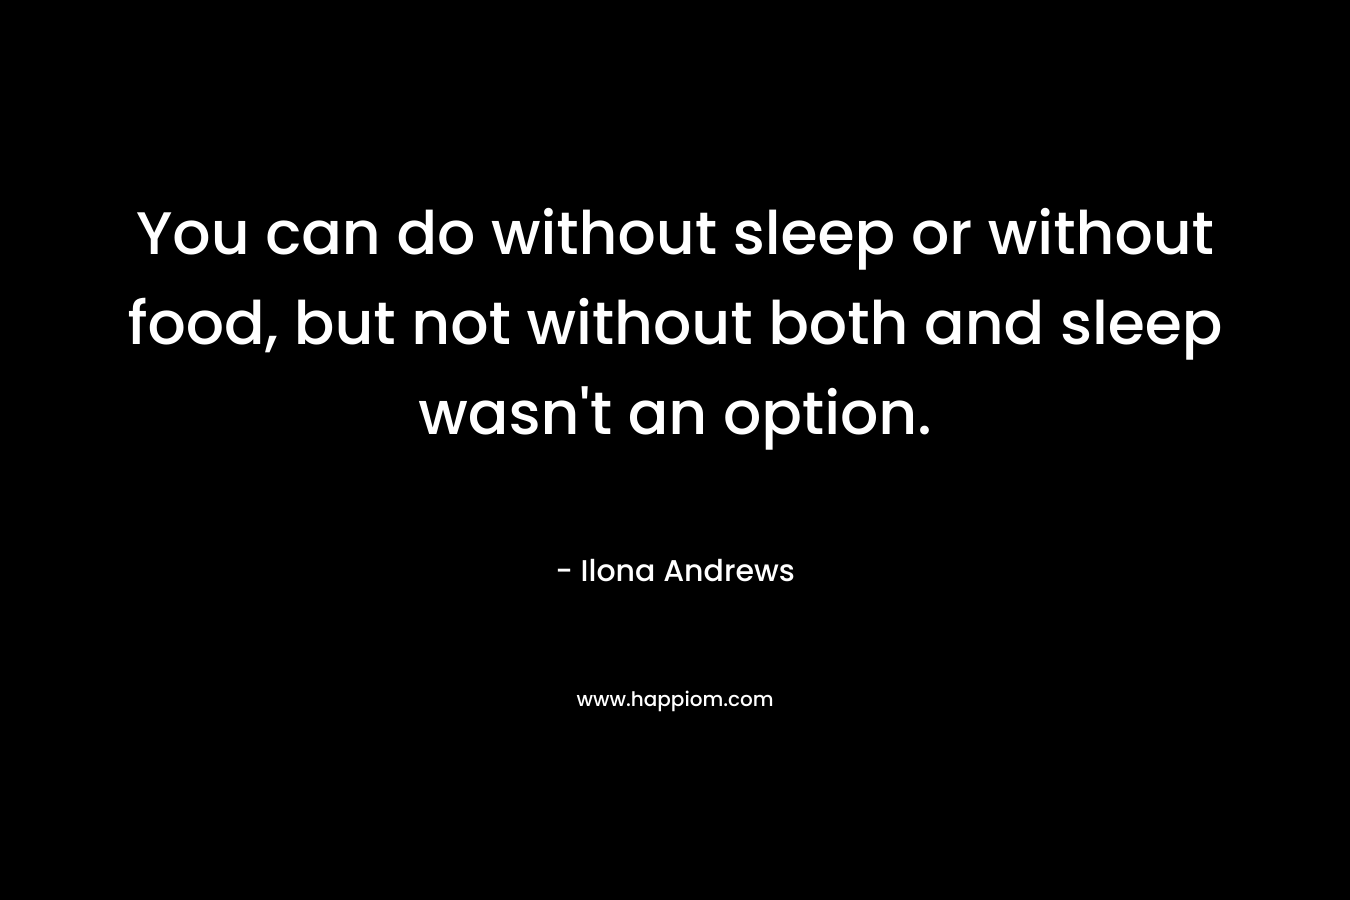 You can do without sleep or without food, but not without both and sleep wasn't an option.